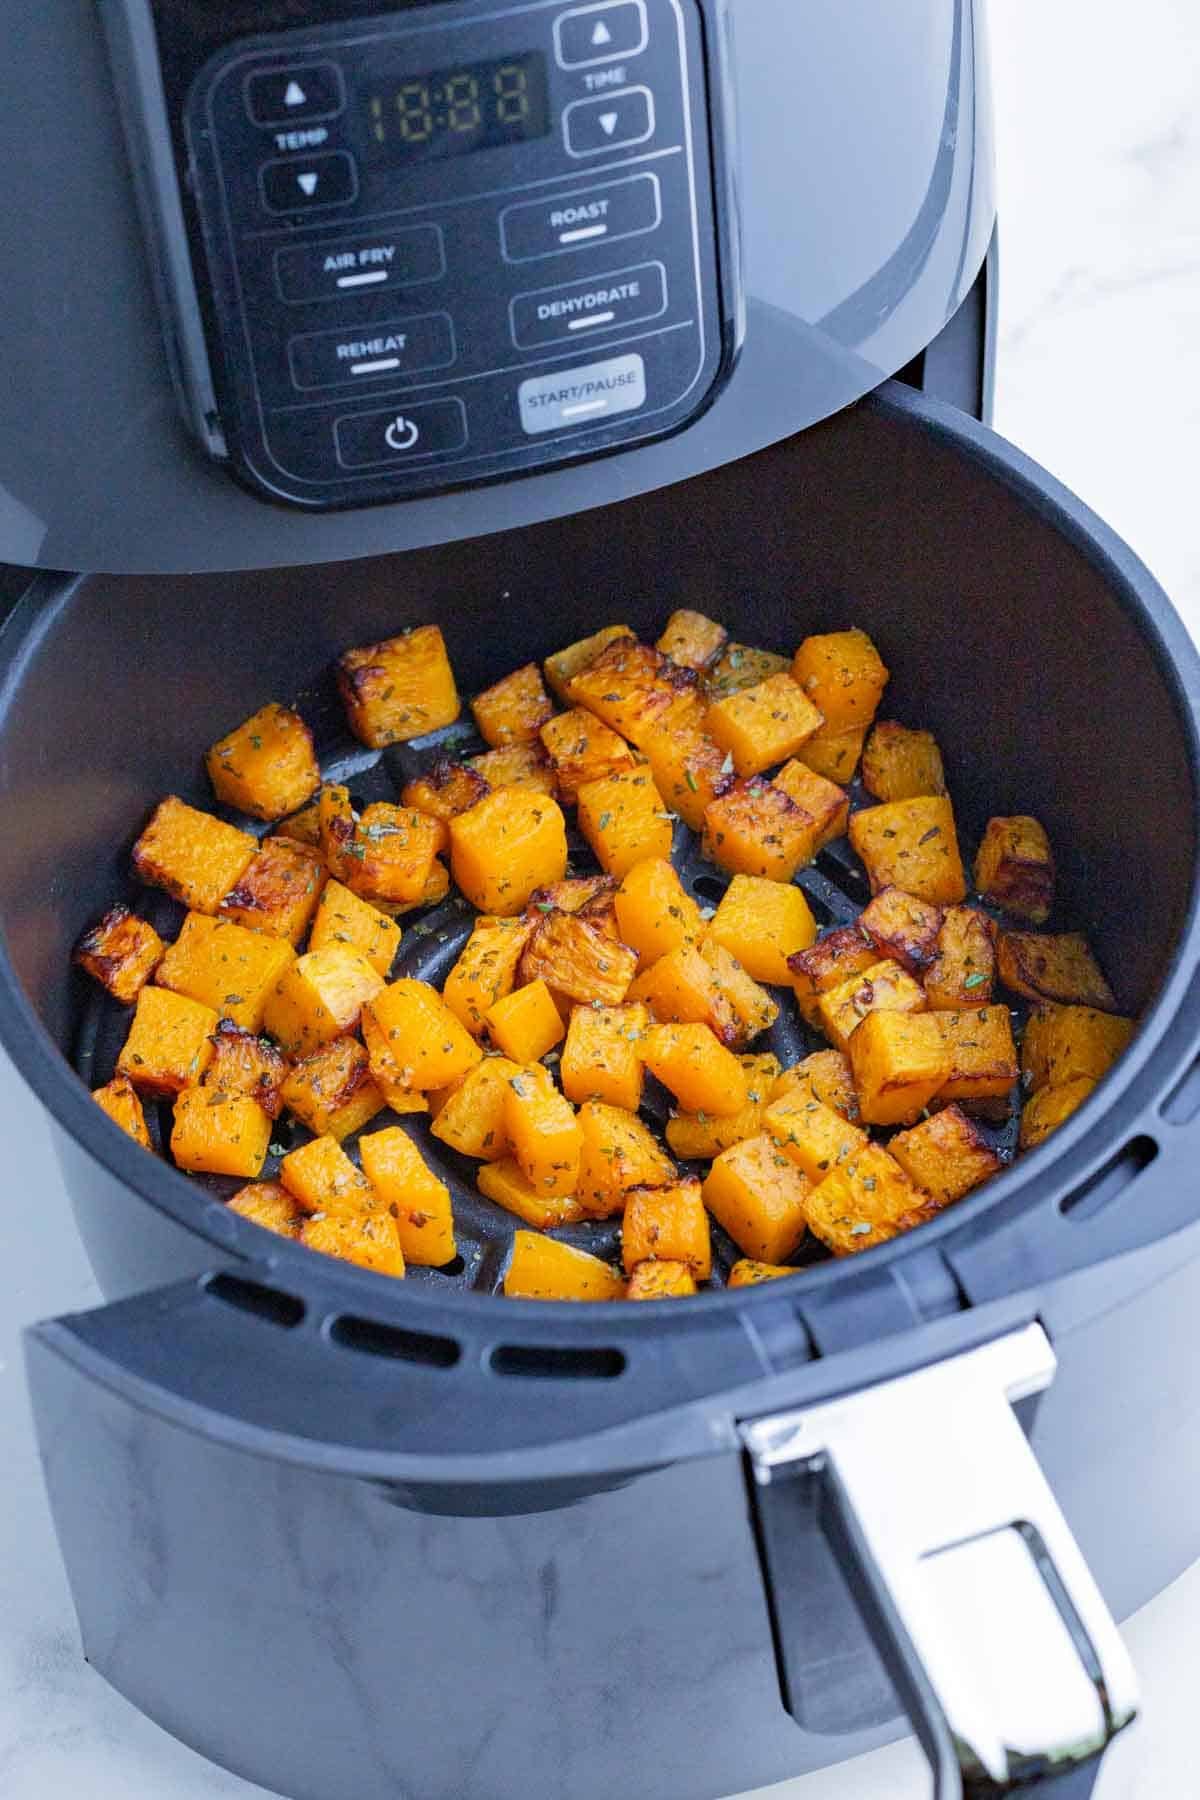 Seasoned butternut squash cubes are cooked in an air fryer.